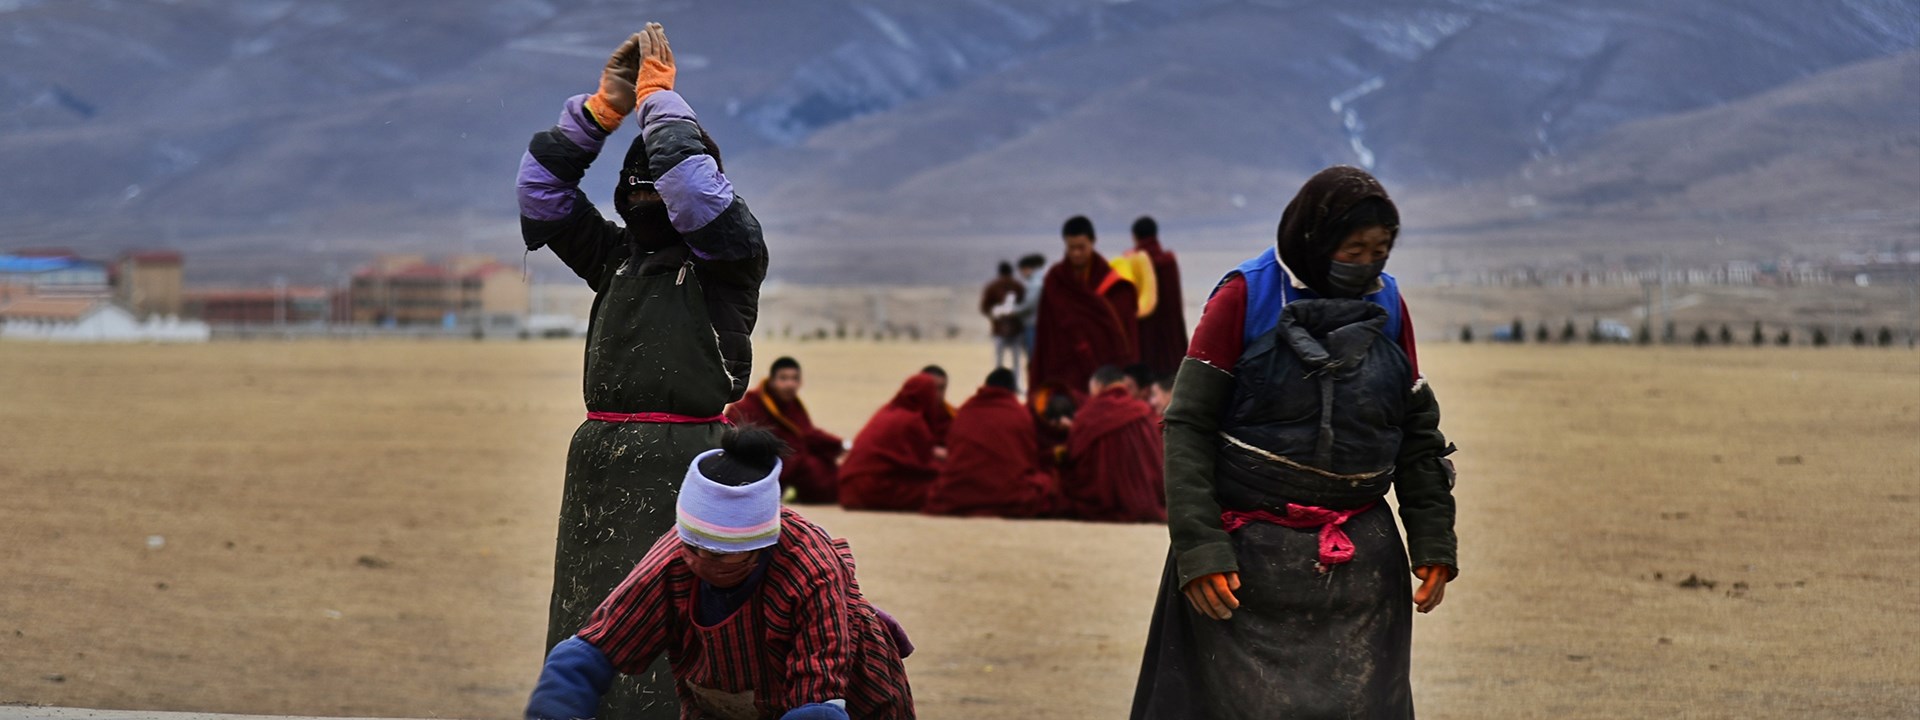 Some Rules of Conduct for Travelers to Tibet